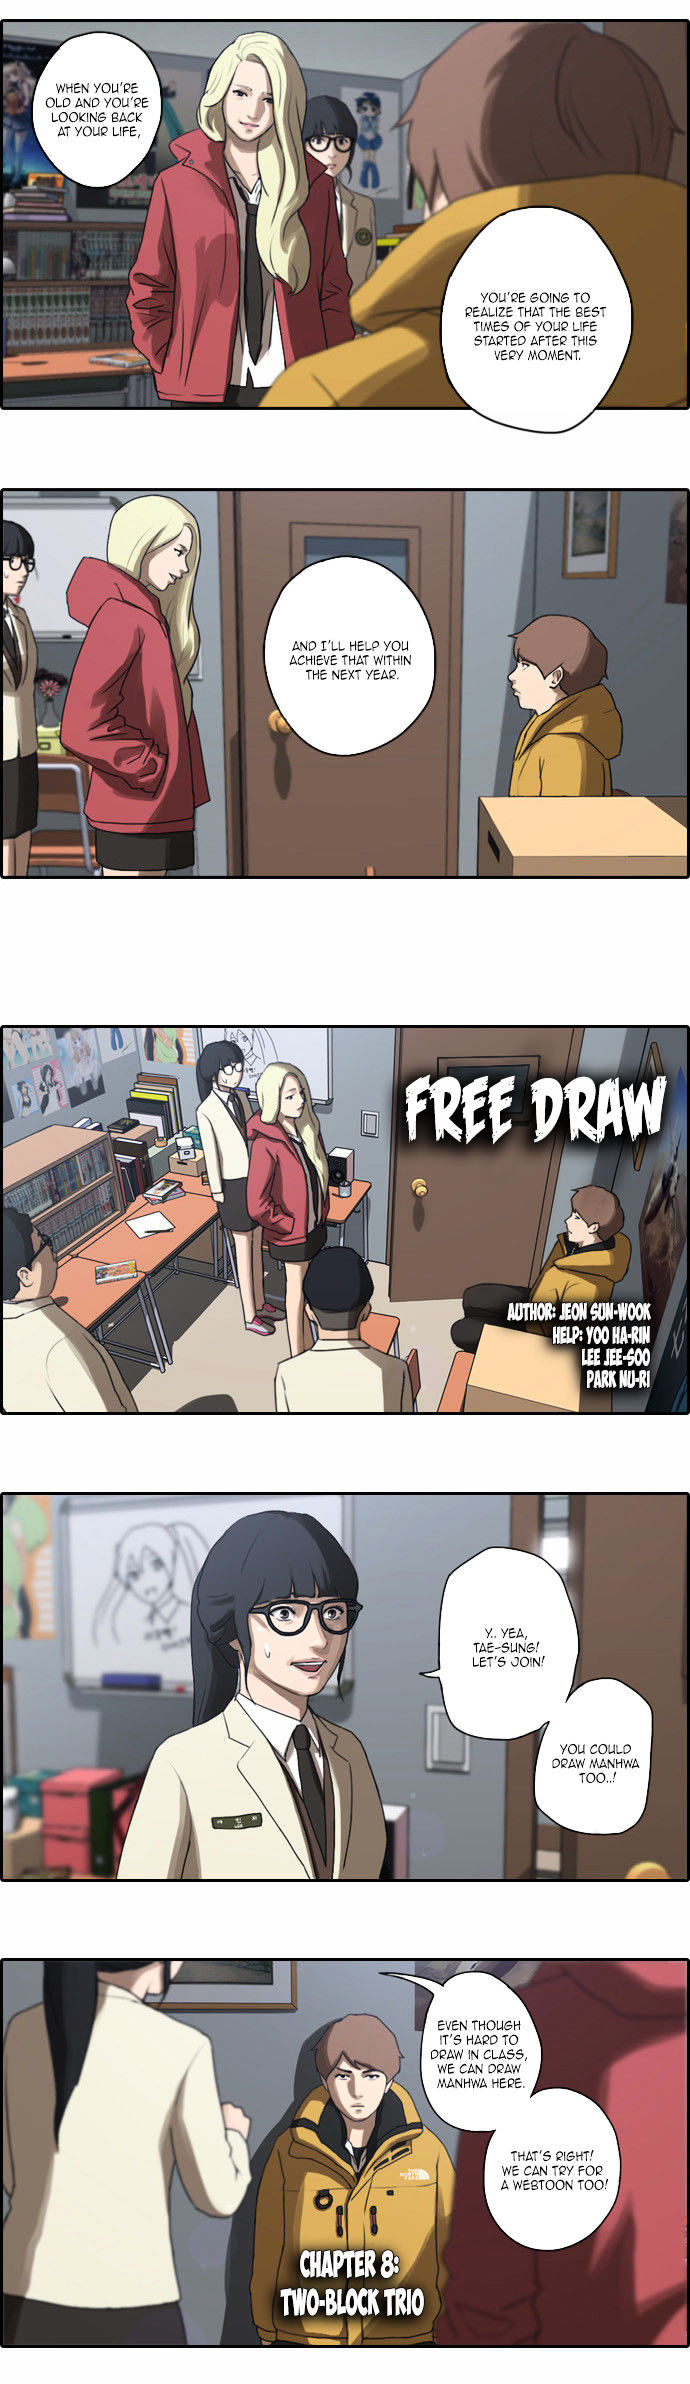 Free Throw - Page 3